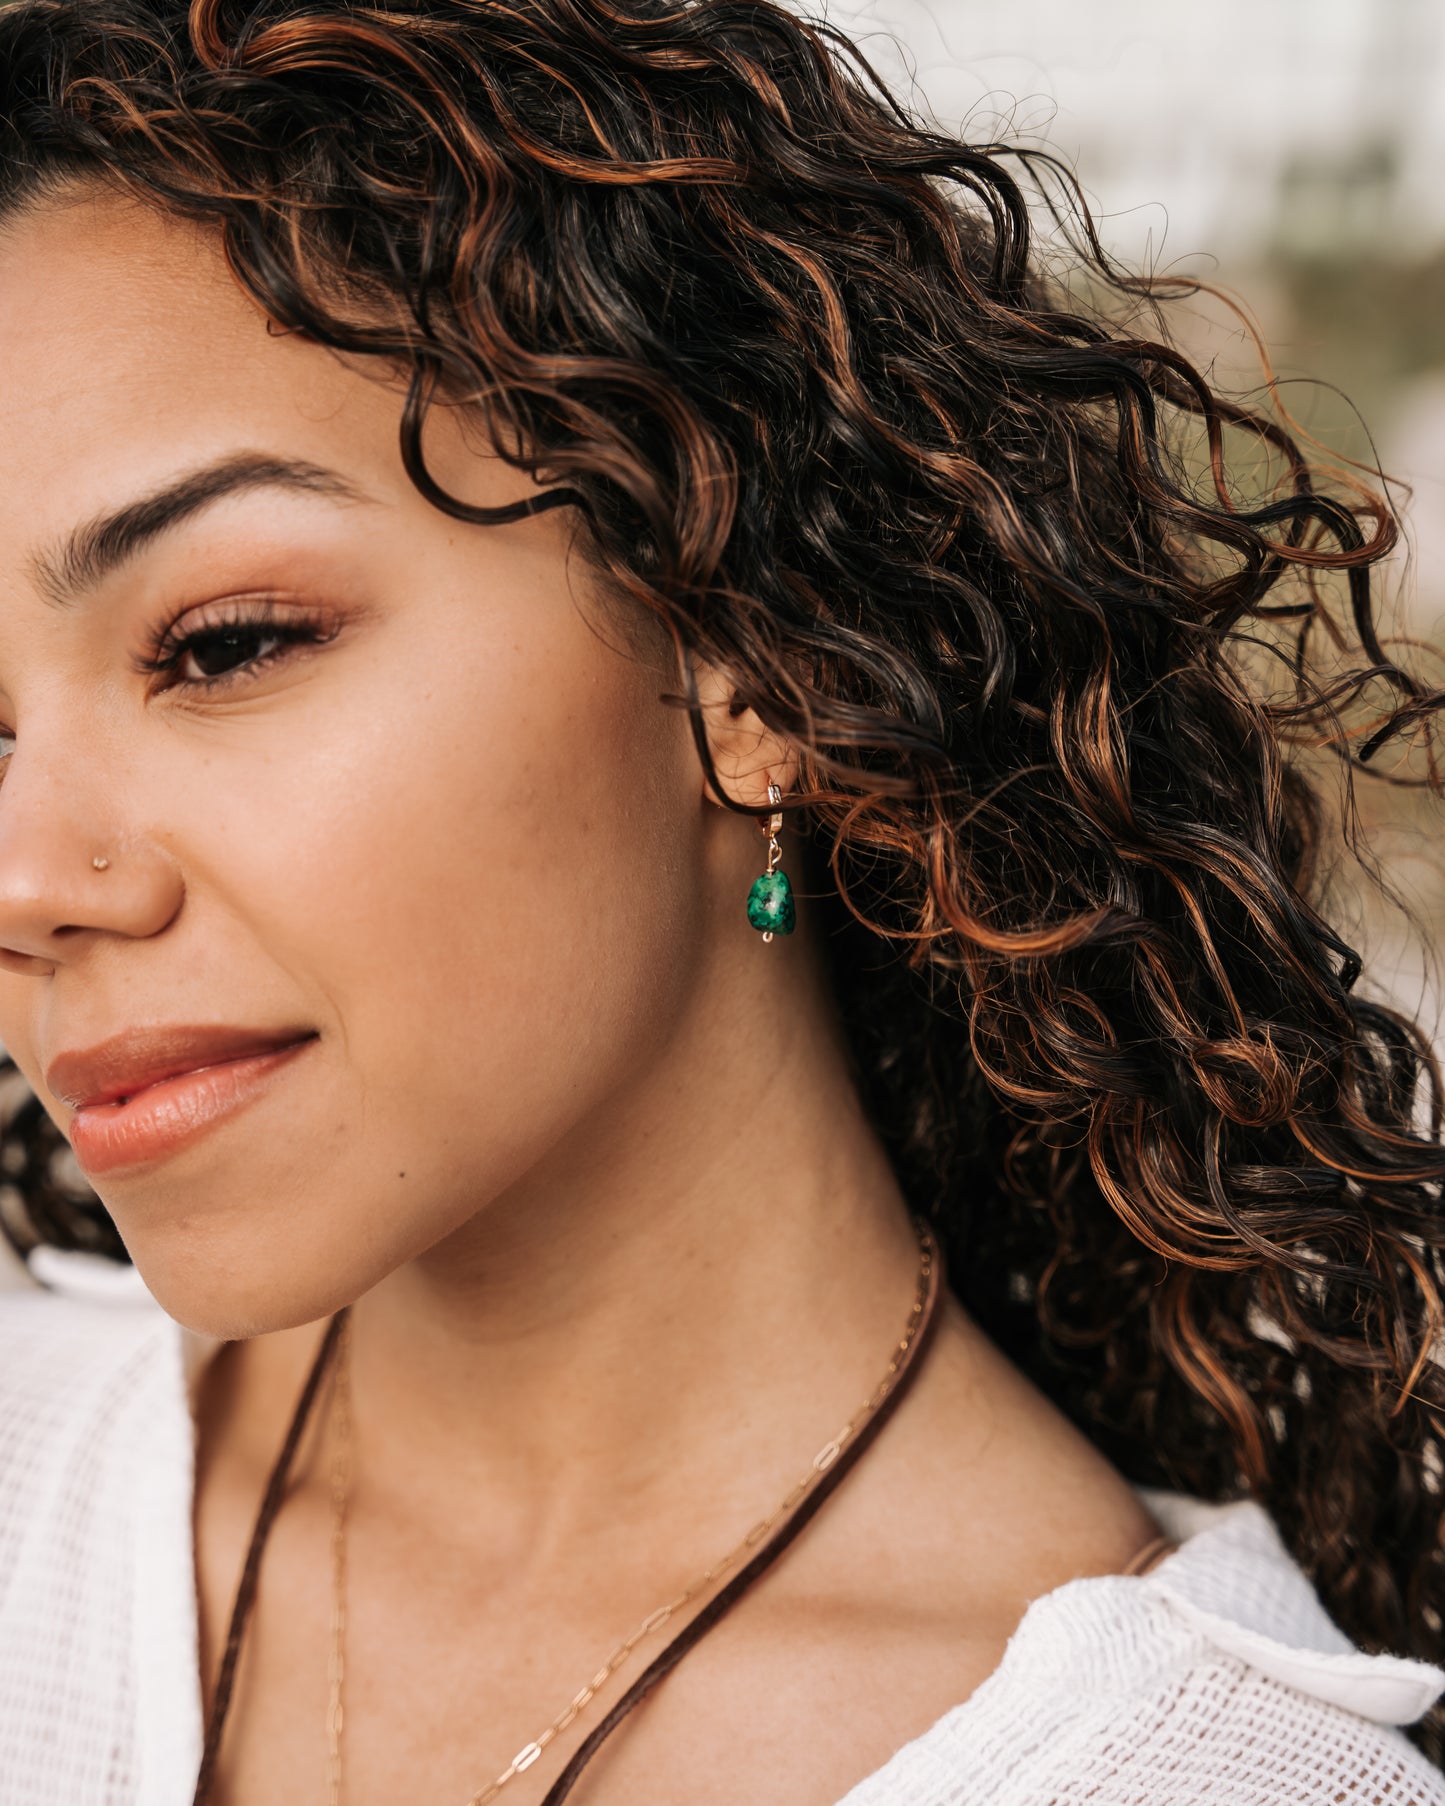 Hold Confidence close: Waterproof Turquoise Huggie Earrings in 14K Gold Fill